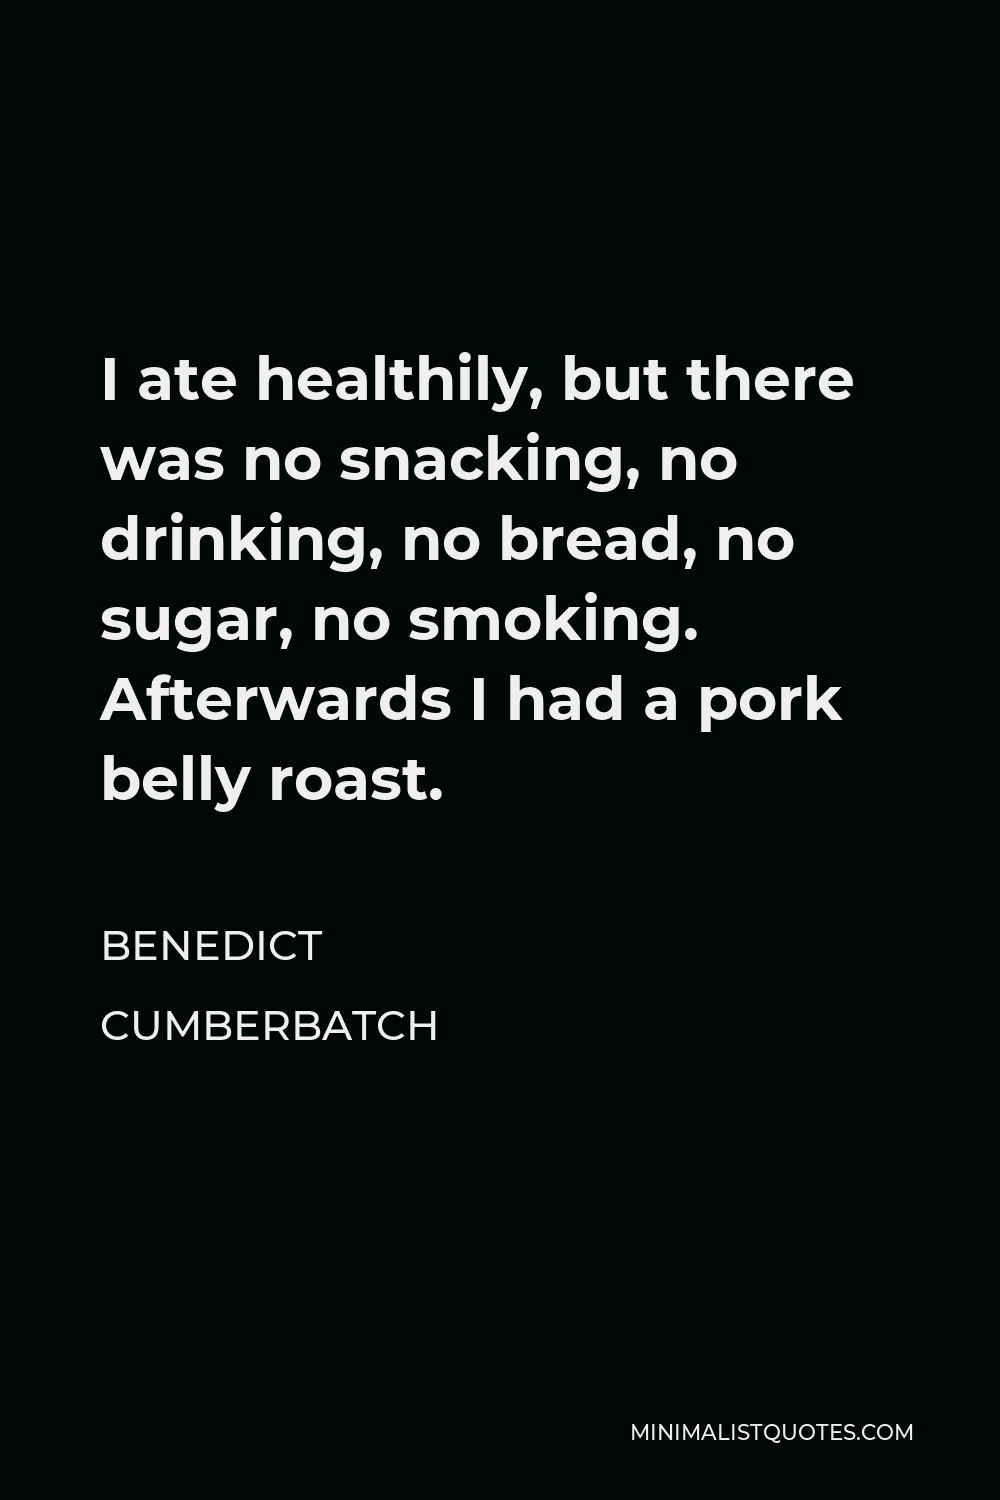 Benedict Cumberbatch Quote - I ate healthily, but there was no snacking, no drinking, no bread, no sugar, no smoking. Afterwards I had a pork belly roast.